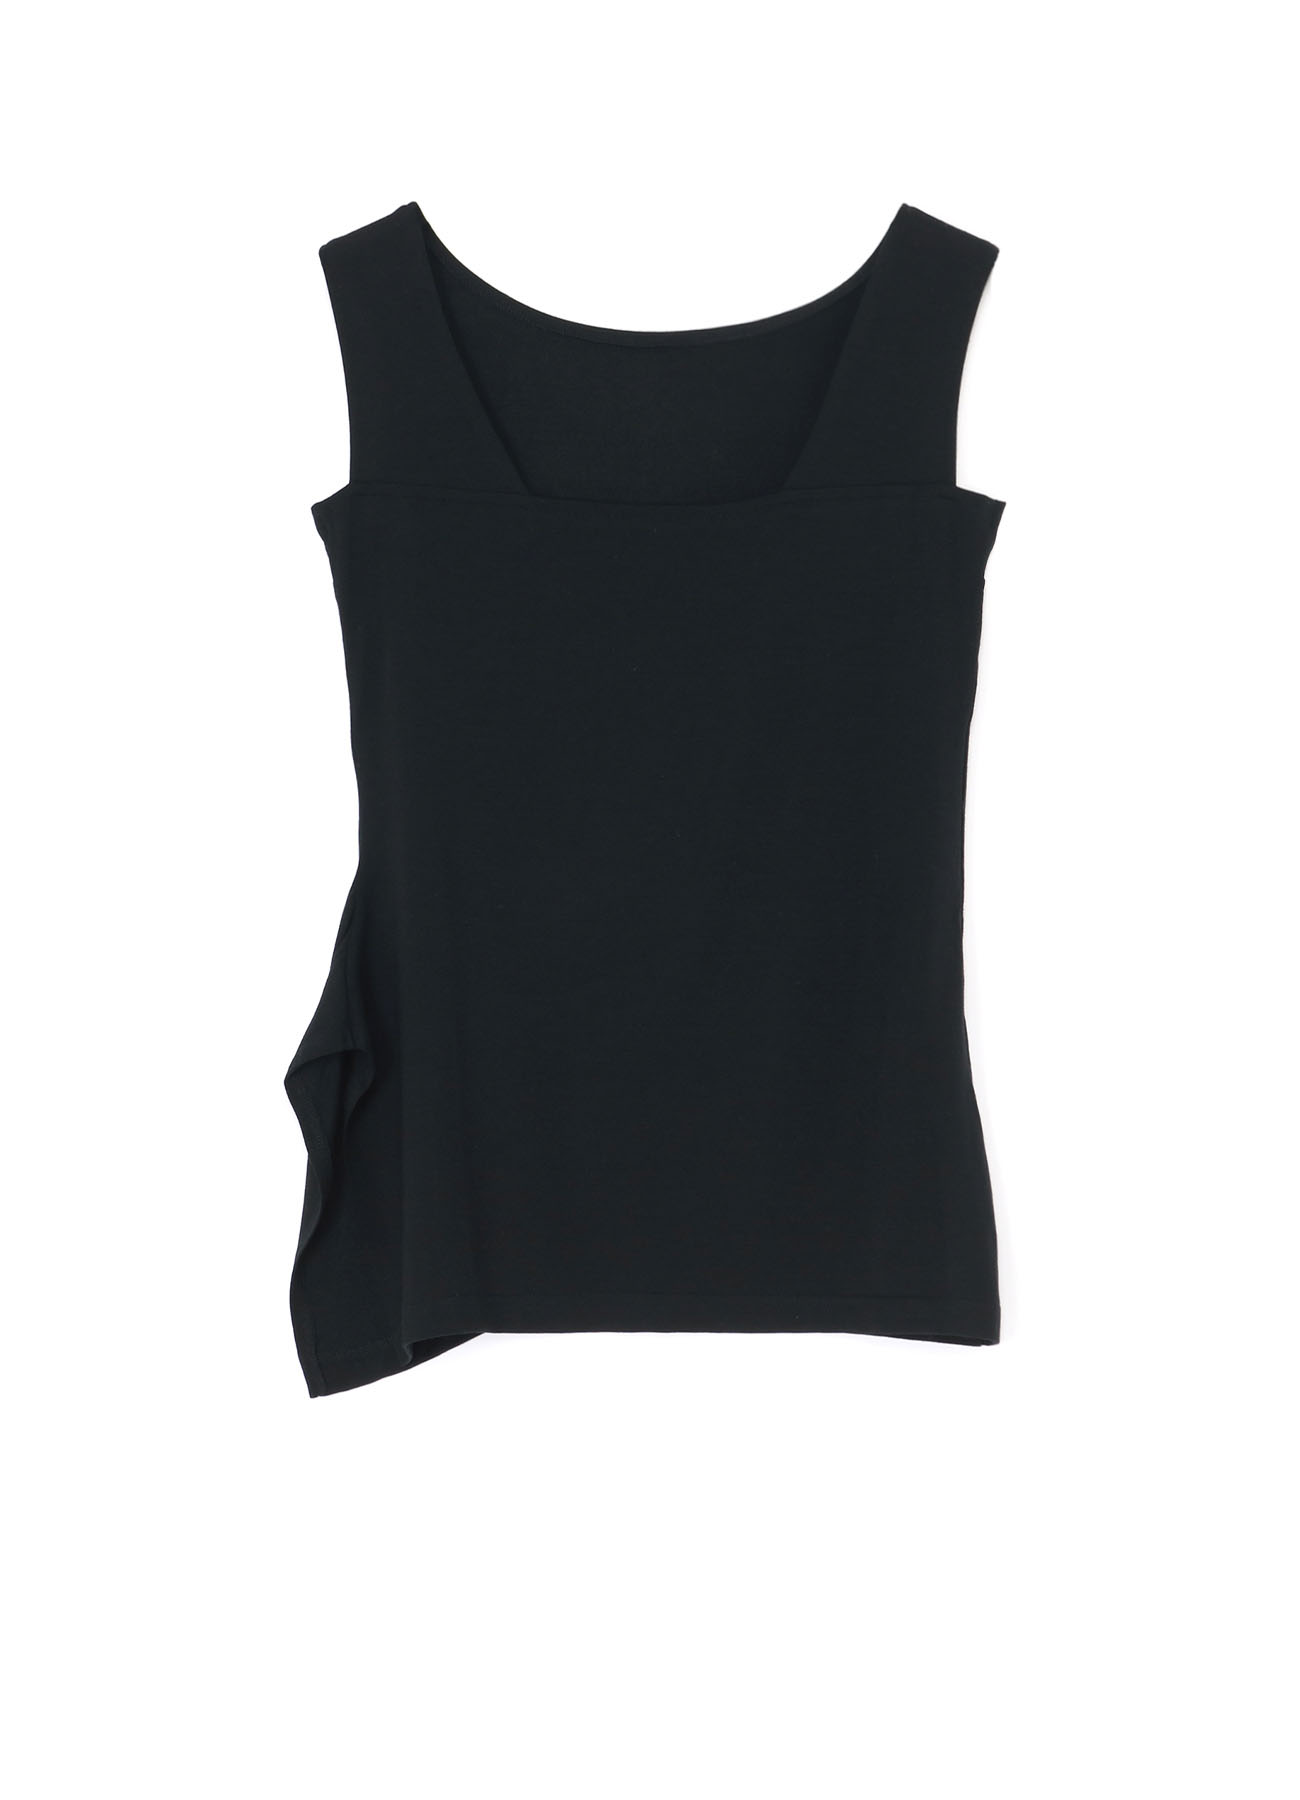 40/- RY JERSEY RIGHT SIDE SLIT CAMISOLE